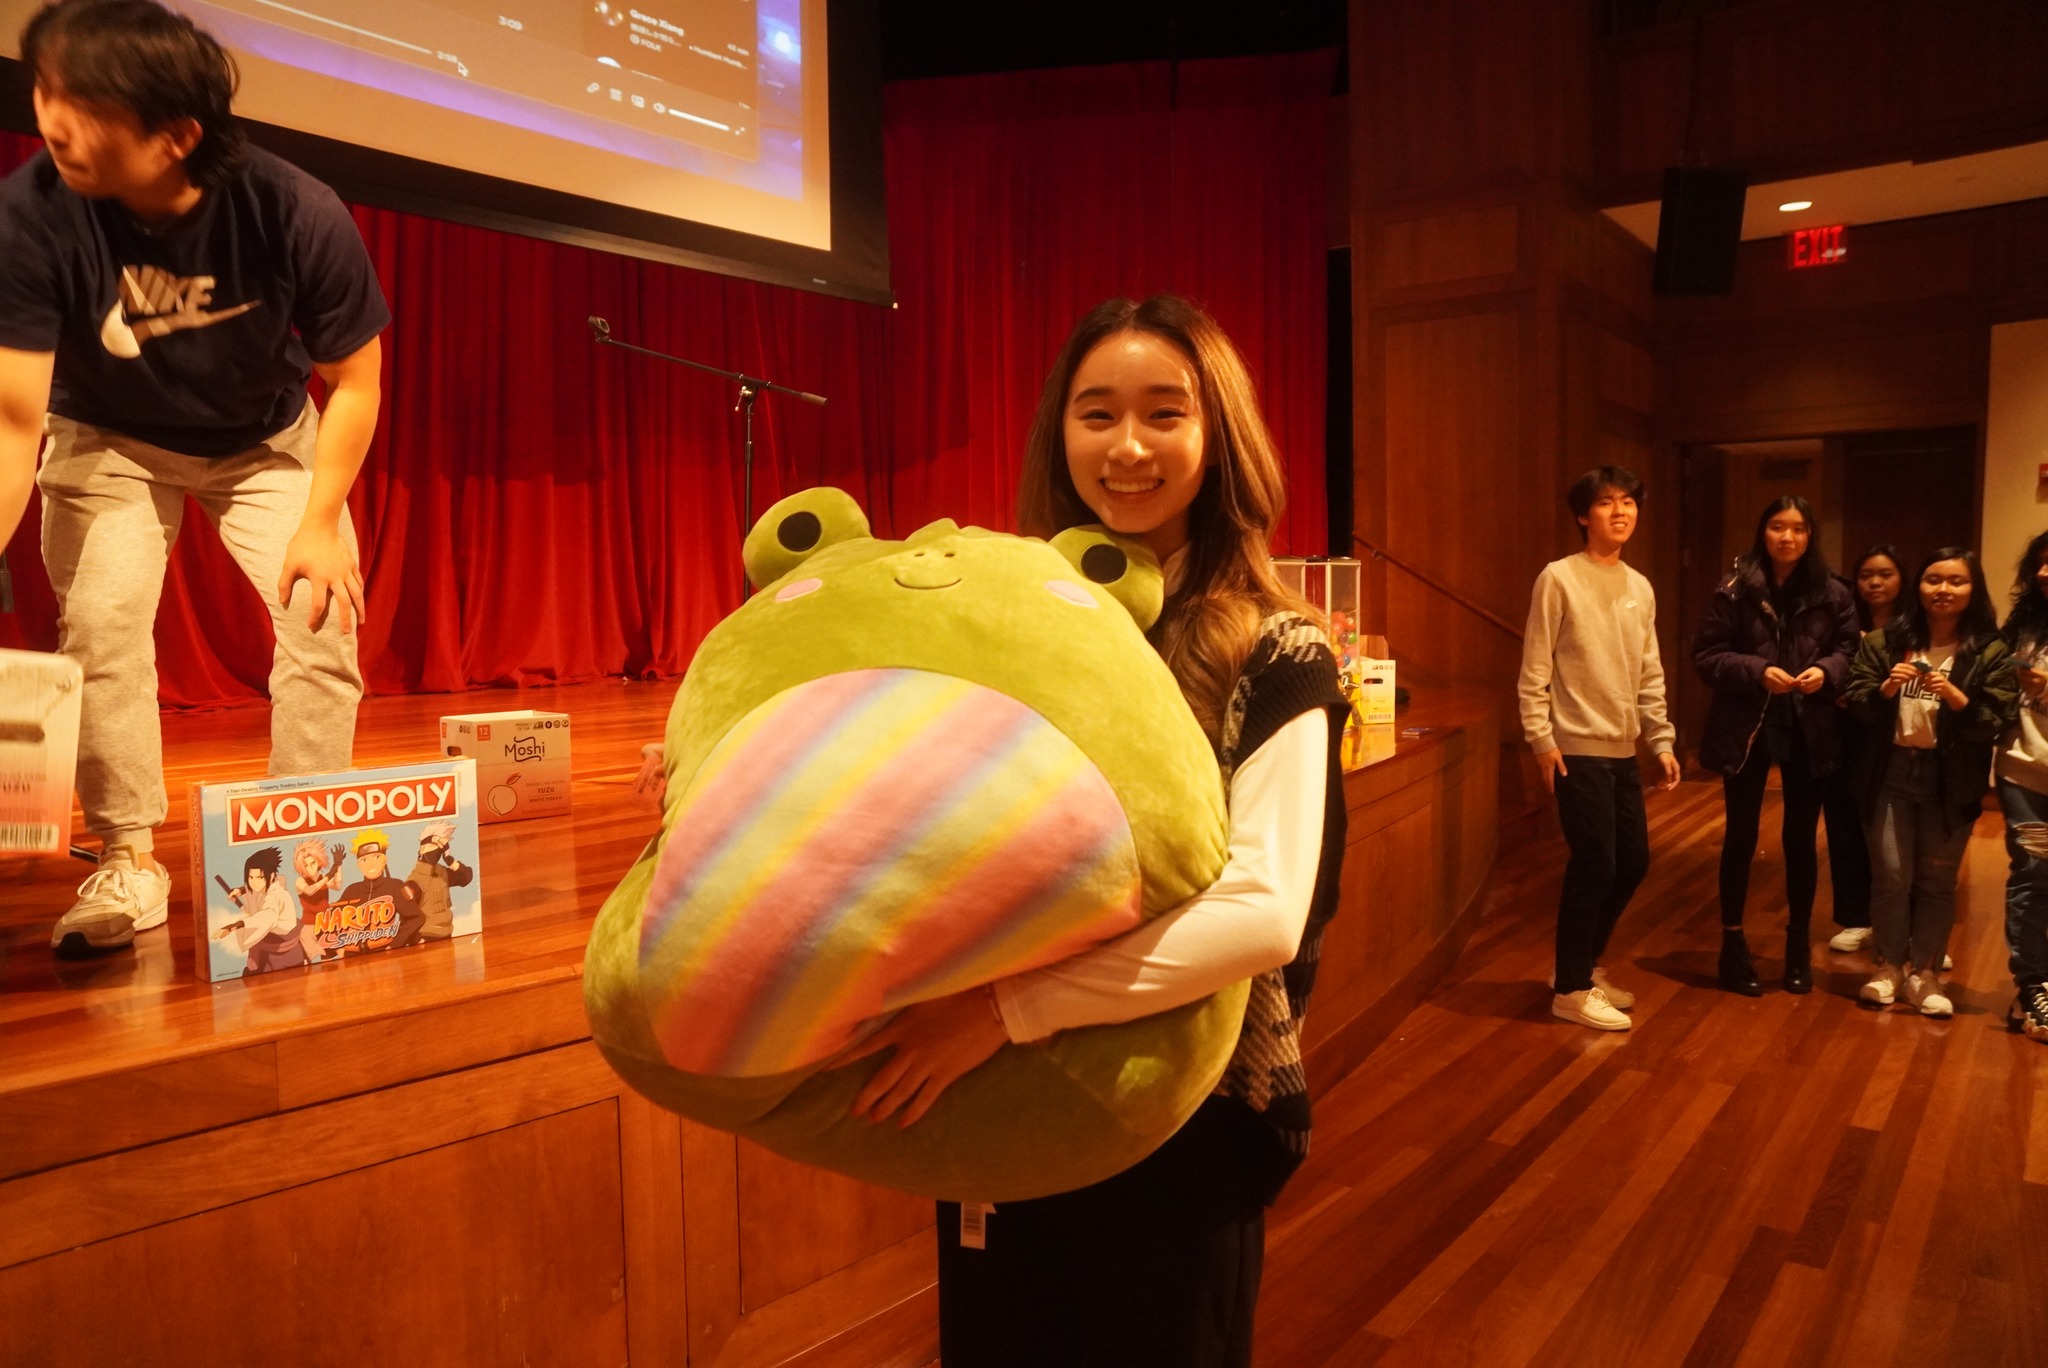 A student smiling and hugging a large plush prize.